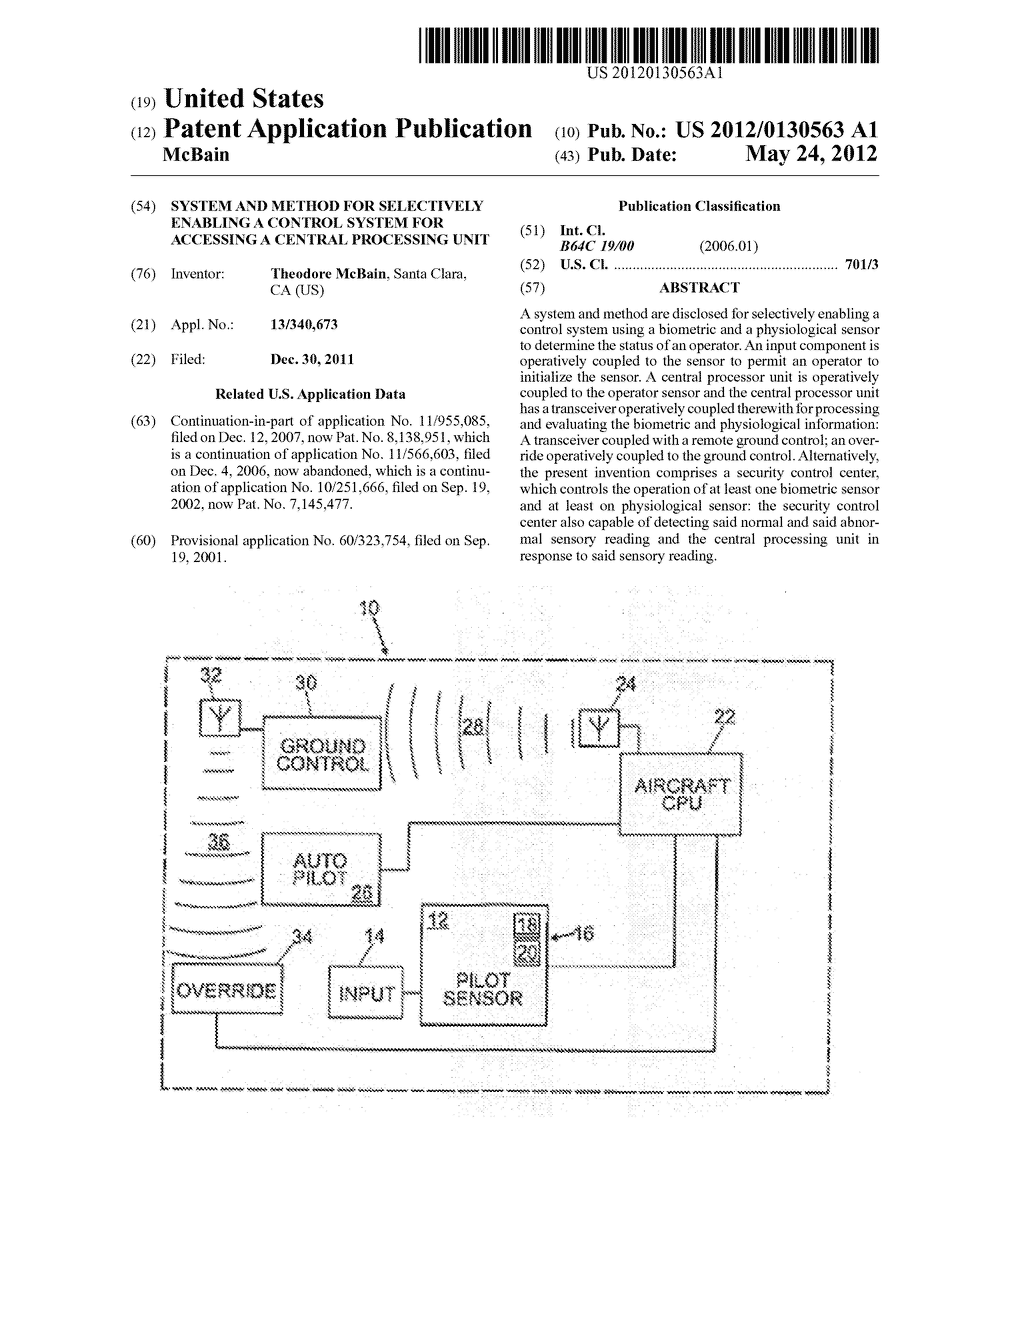 SYSTEM AND METHOD FOR SELECTIVELY ENABLING A CONTROL SYSTEM FOR ACCESSING     A CENTRAL PROCESSING UNIT - diagram, schematic, and image 01